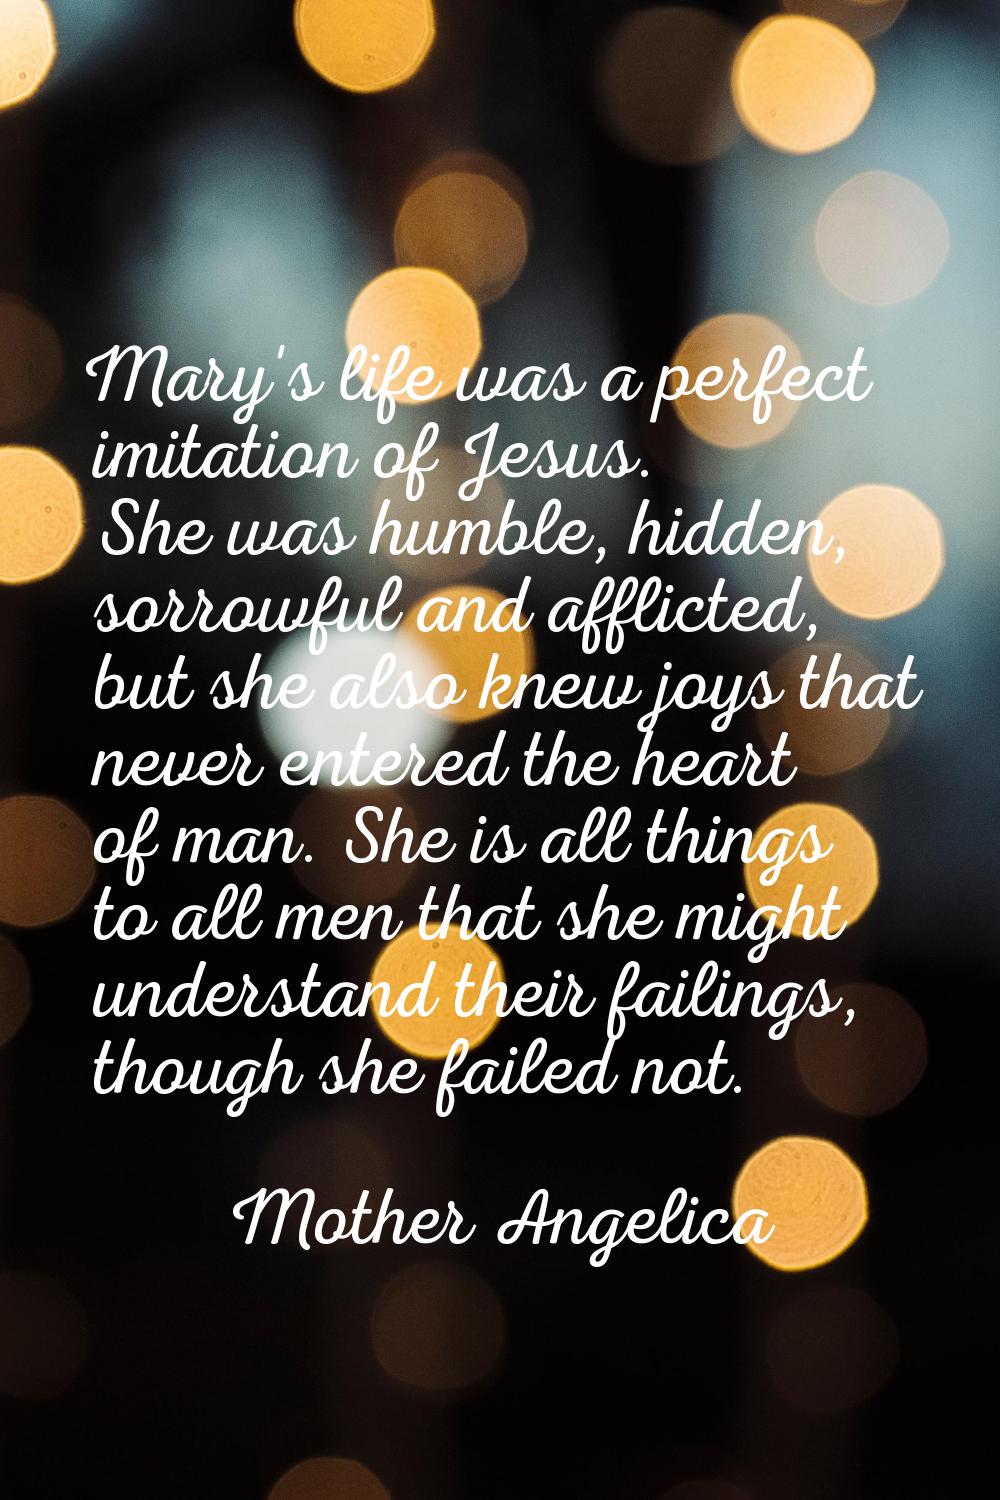 Mary's life was a perfect imitation of Jesus. She was humble, hidden, sorrowful and afflicted, but 